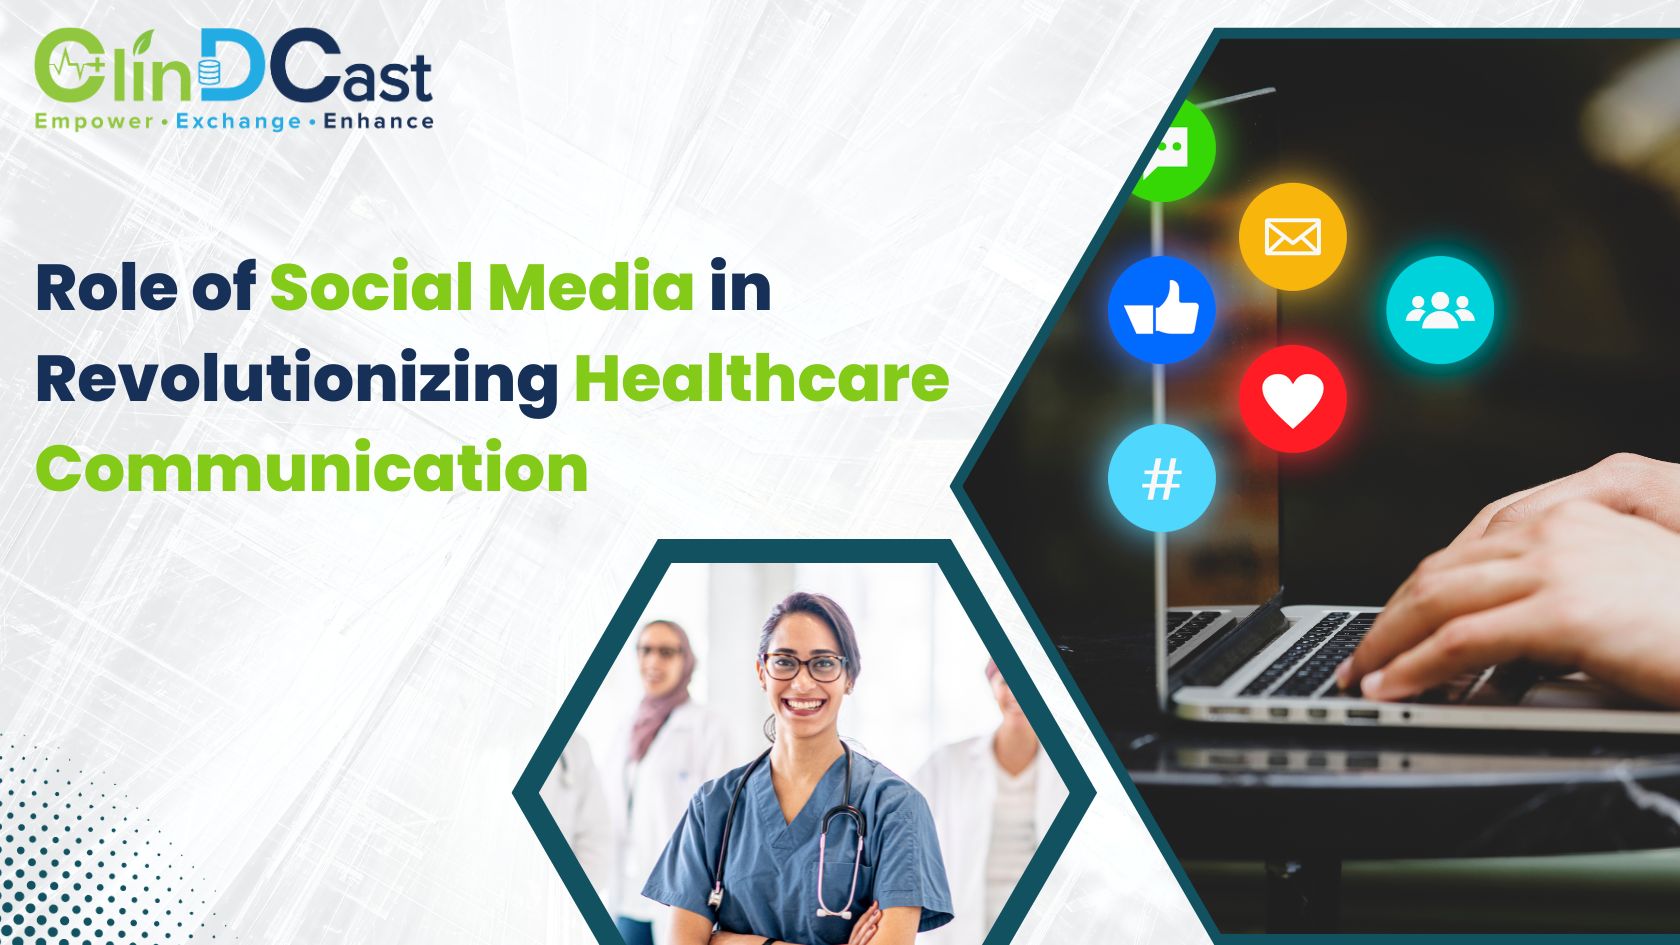 The Vital Role of Social Media in Revolutionizing Healthcare Communication